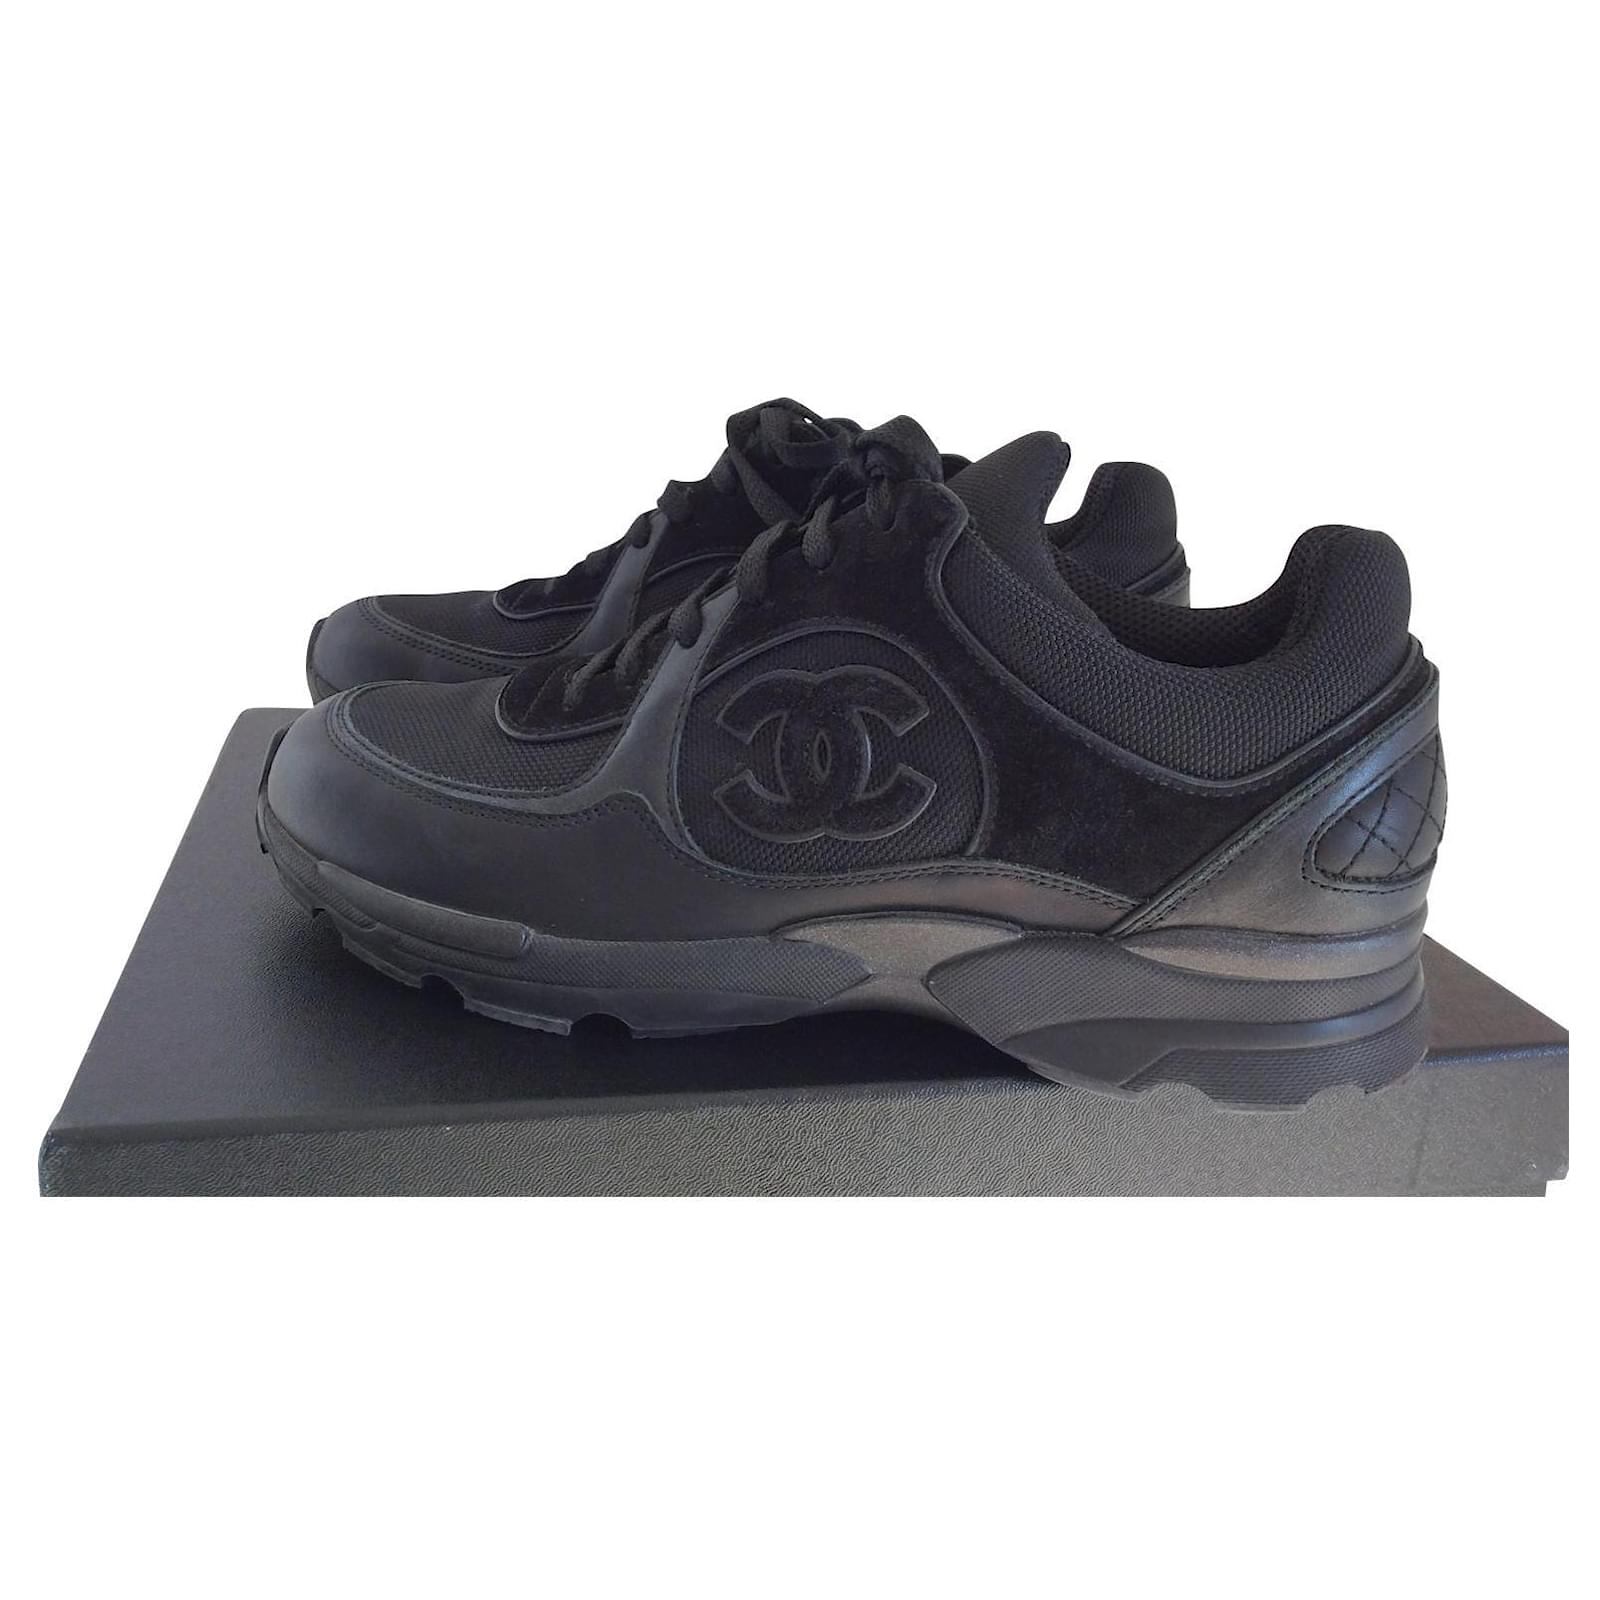 Chanel Sneakers - Lampoo